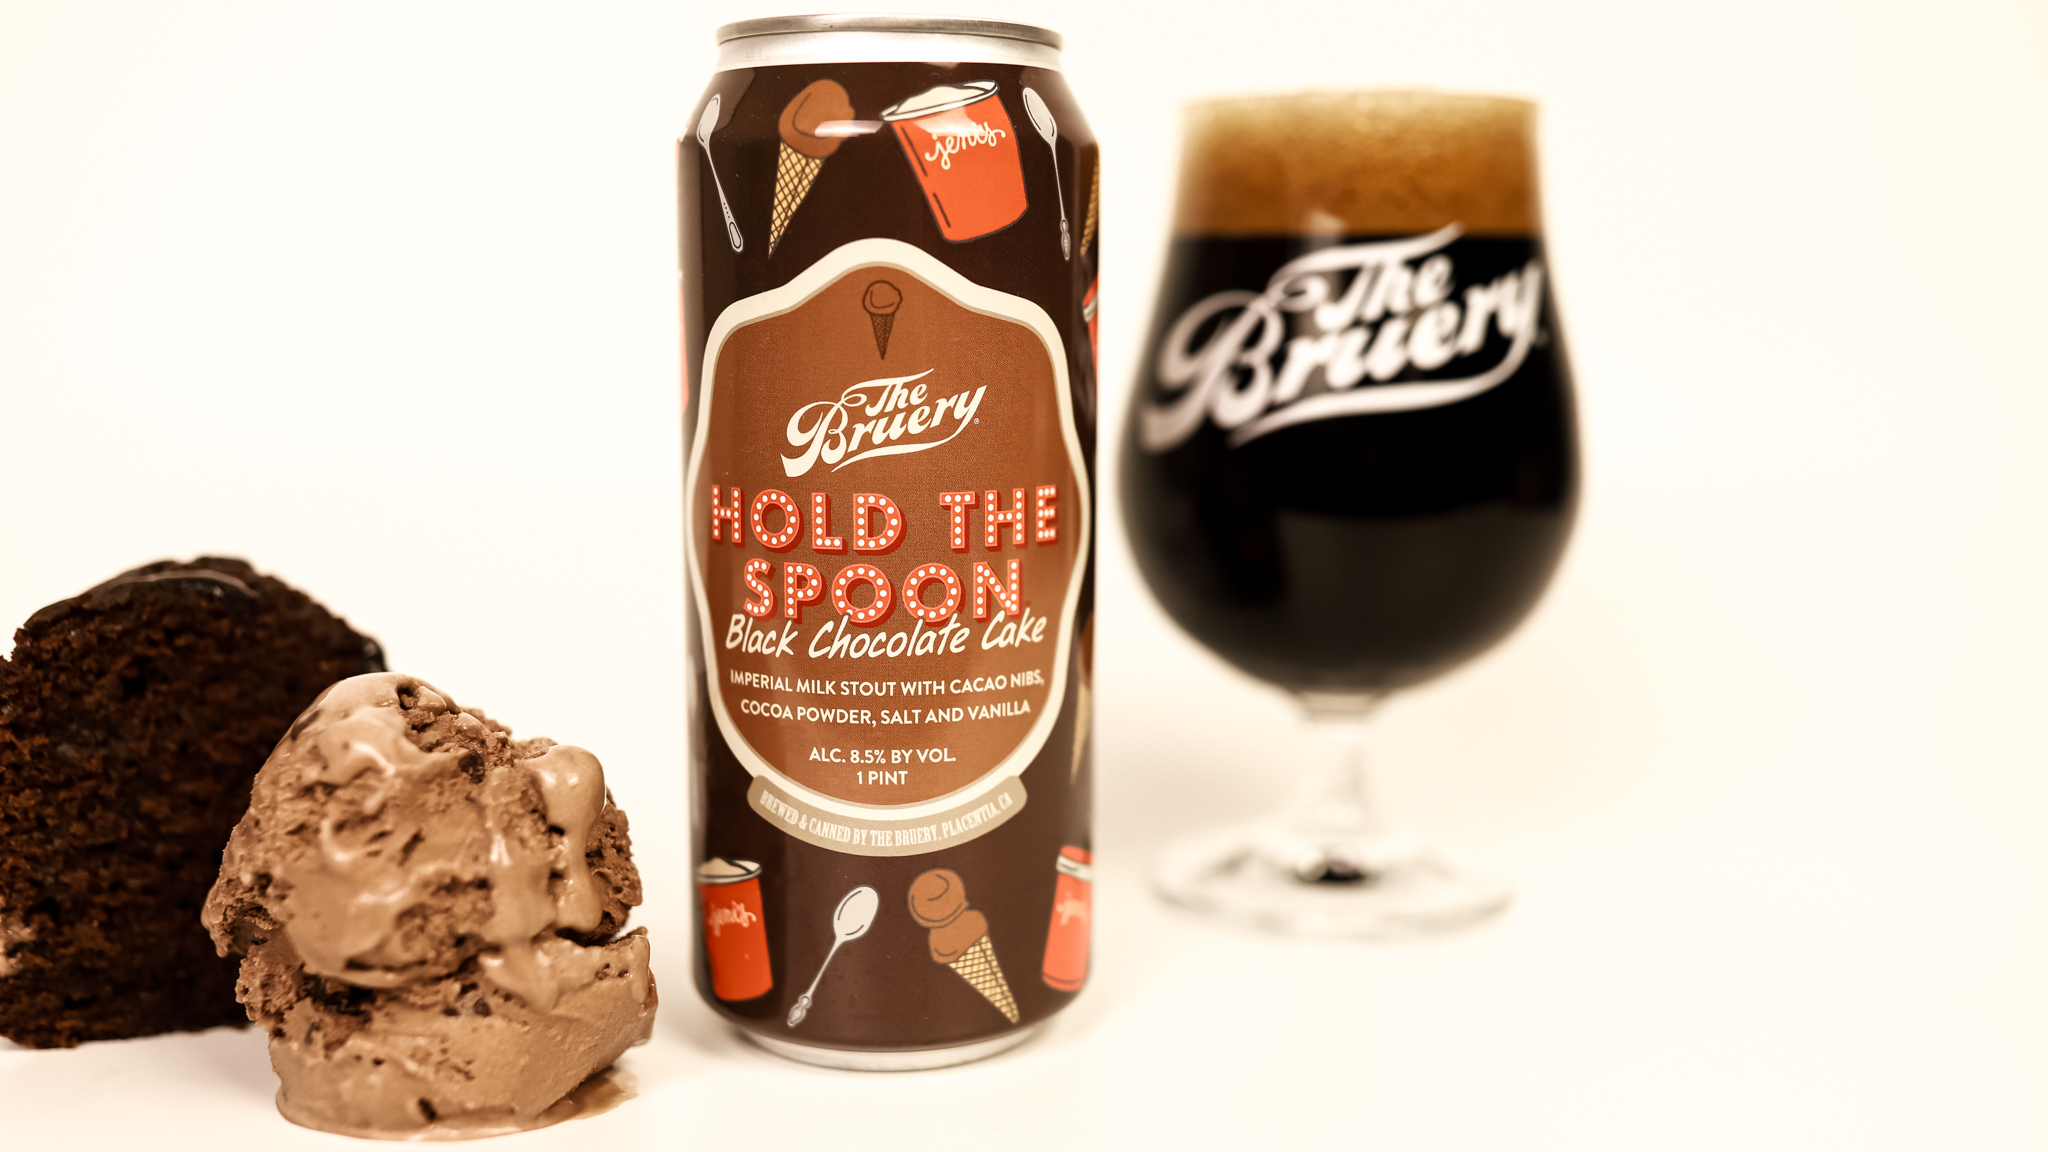 image of Hold The Spoon Black Chocolate Cake, a collaboration with The Bruery and Jeni’s Splendid Ice Creams courtesy of The Bruery